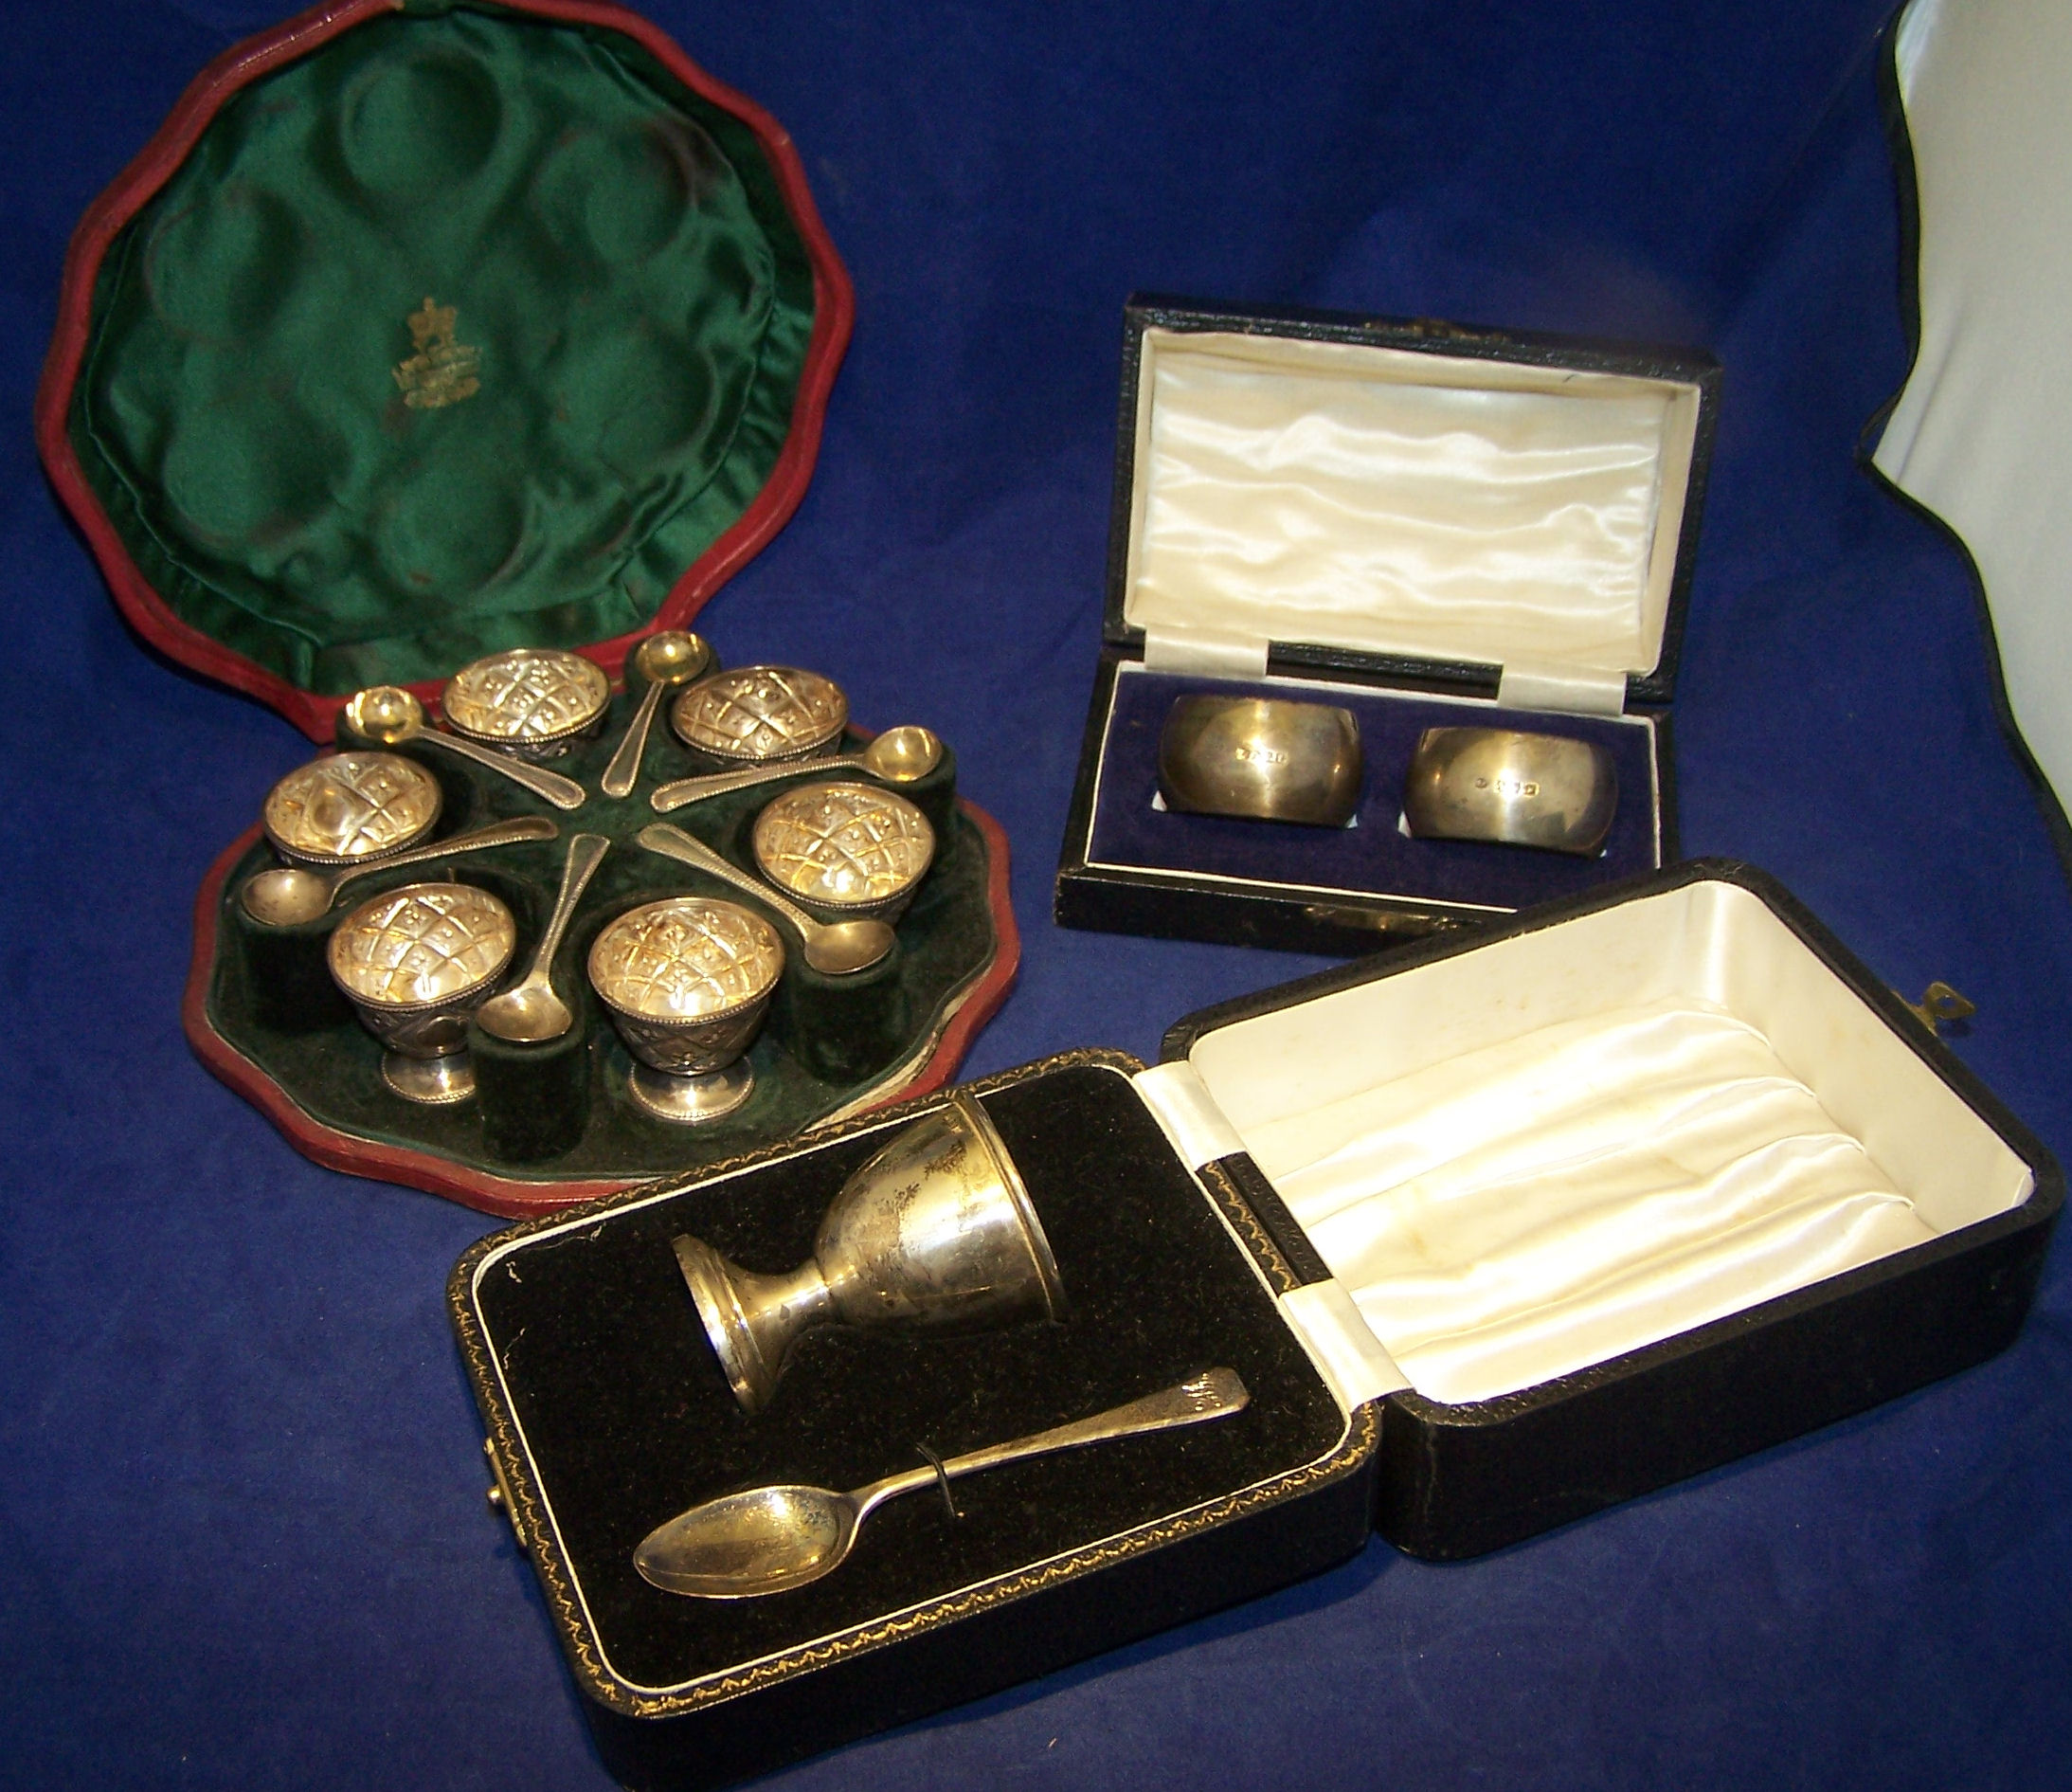 A pair of plain silver Serviette Rings, Birmingham 1921 and 1924 (cased), a silver Egg Cup and Spoon